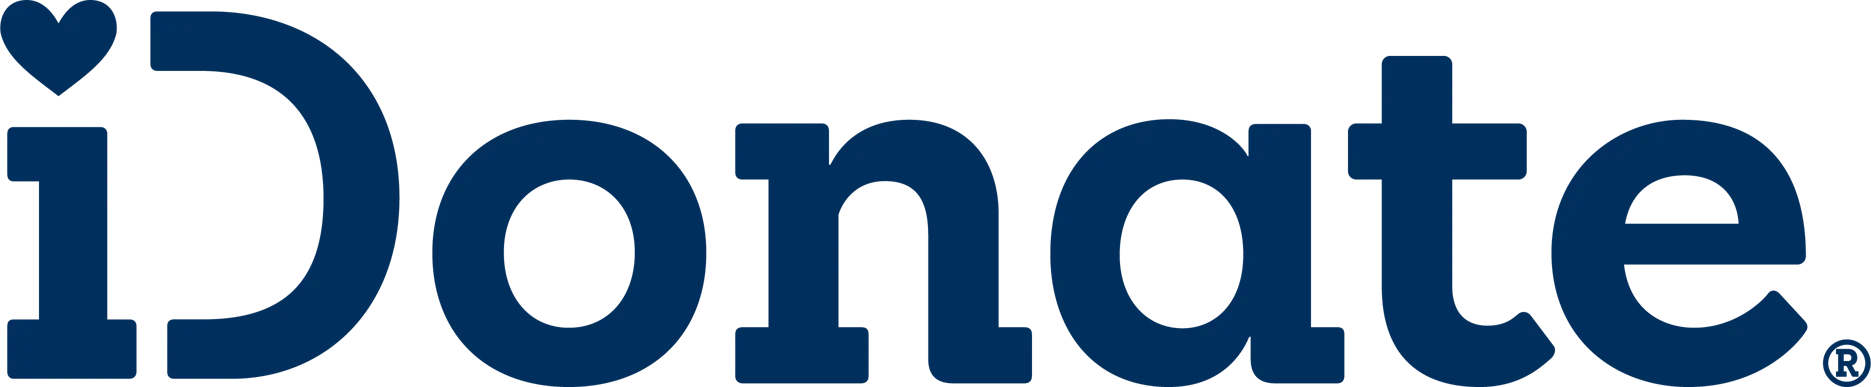 This image shows the logo of iDonate, a top peer-to-peer fundraising software solution.